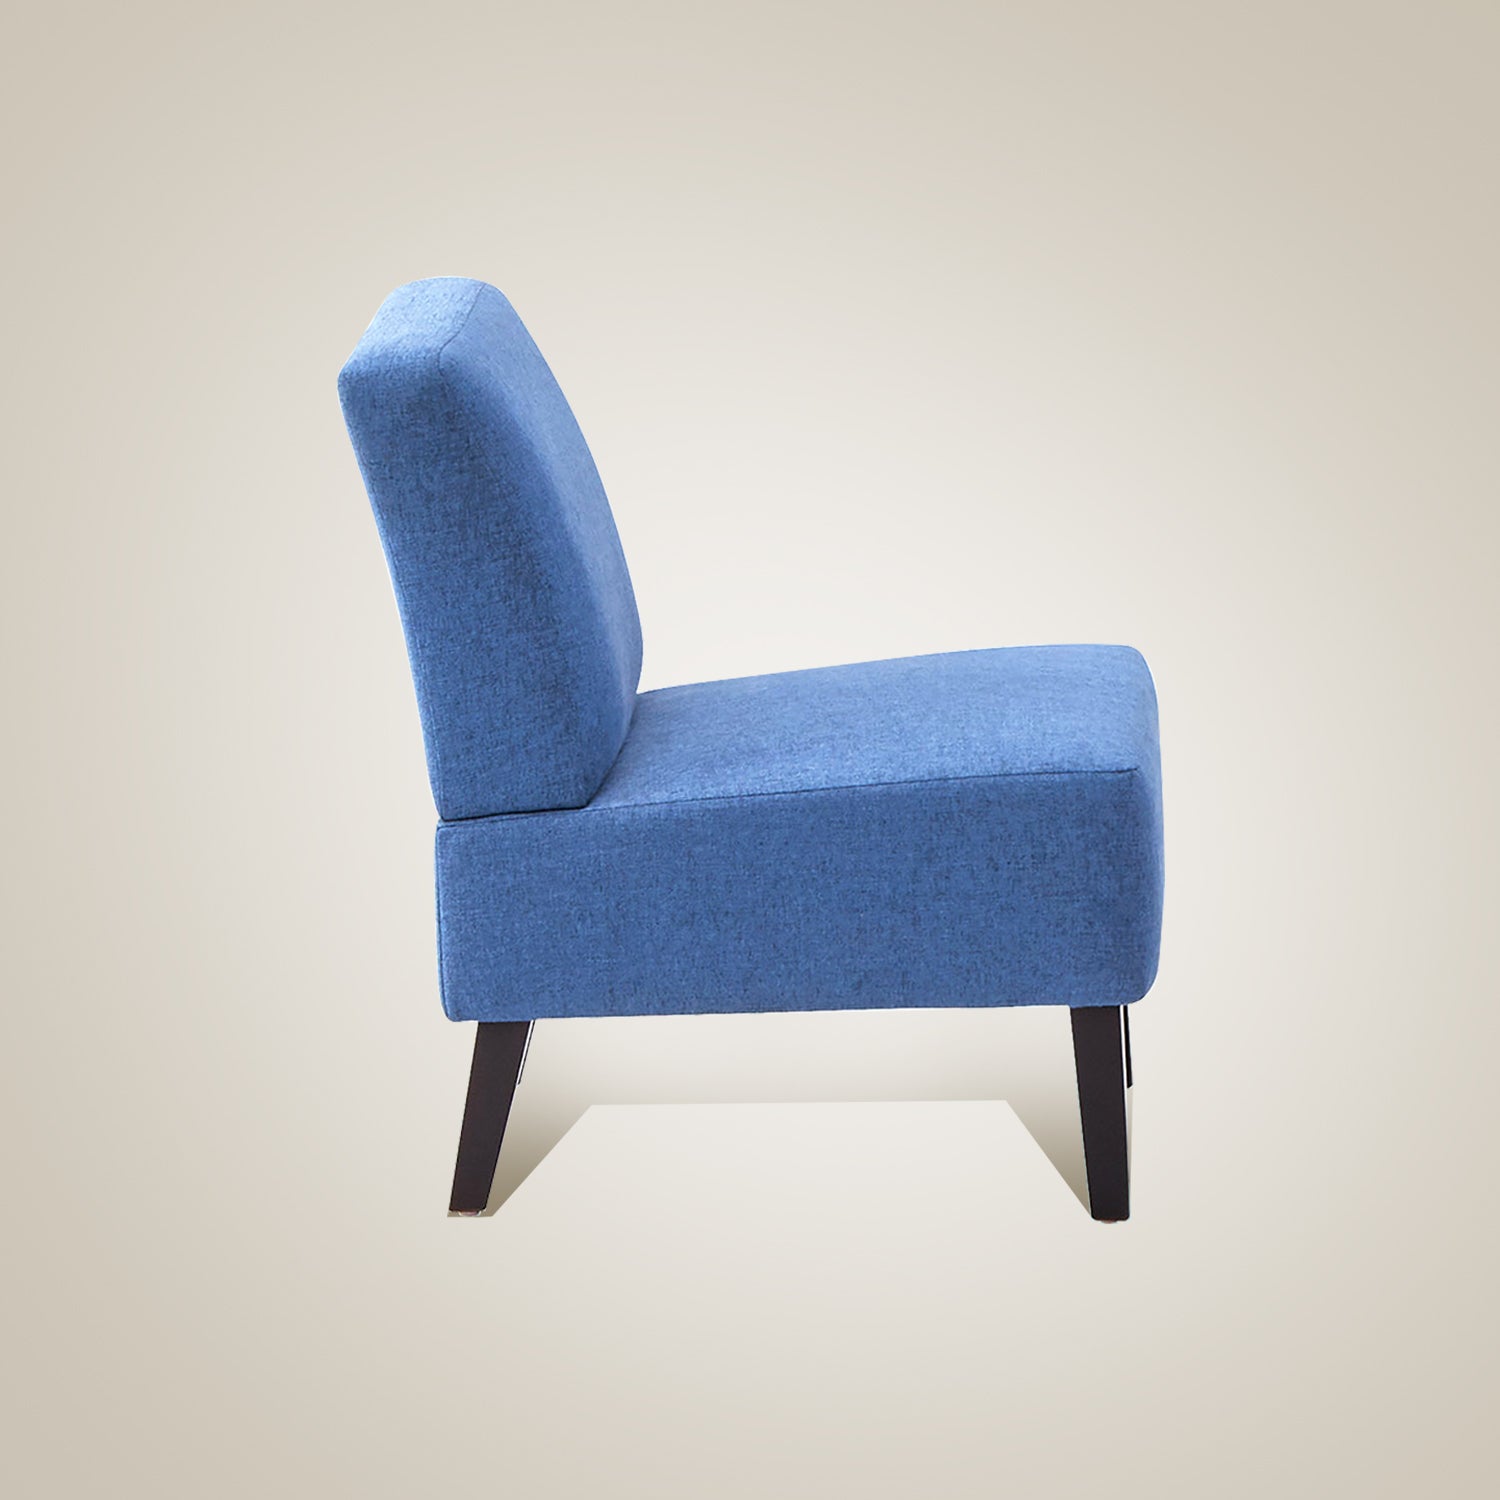 ARENA KD Lounge Chair (Dusk Blue/Green )